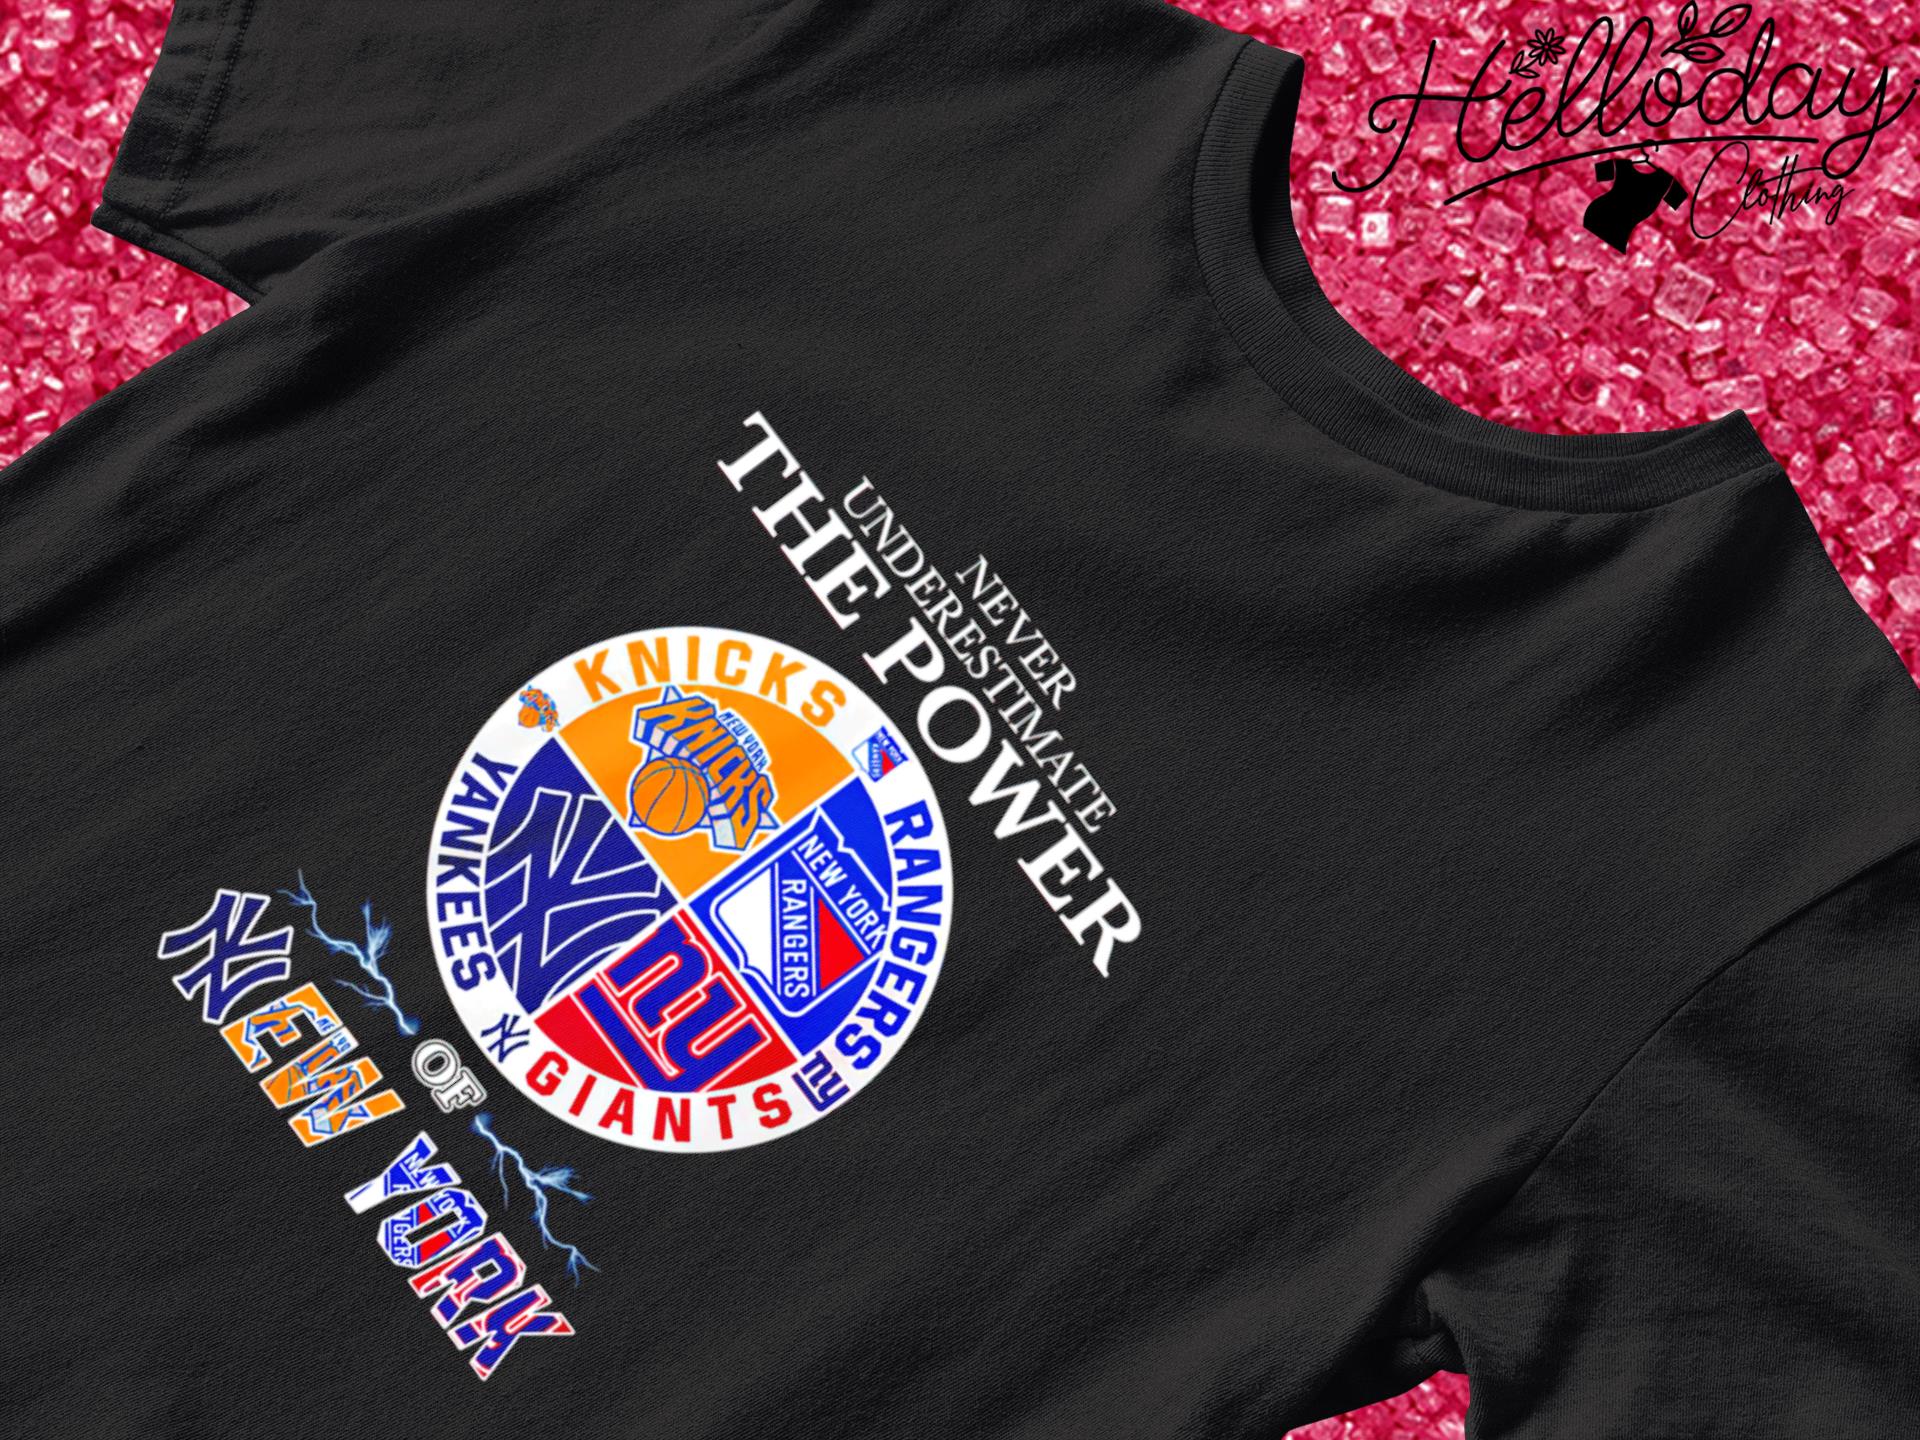 Never Underestimate The Power of New York Knicks Rangers Yankees and Giants shirt